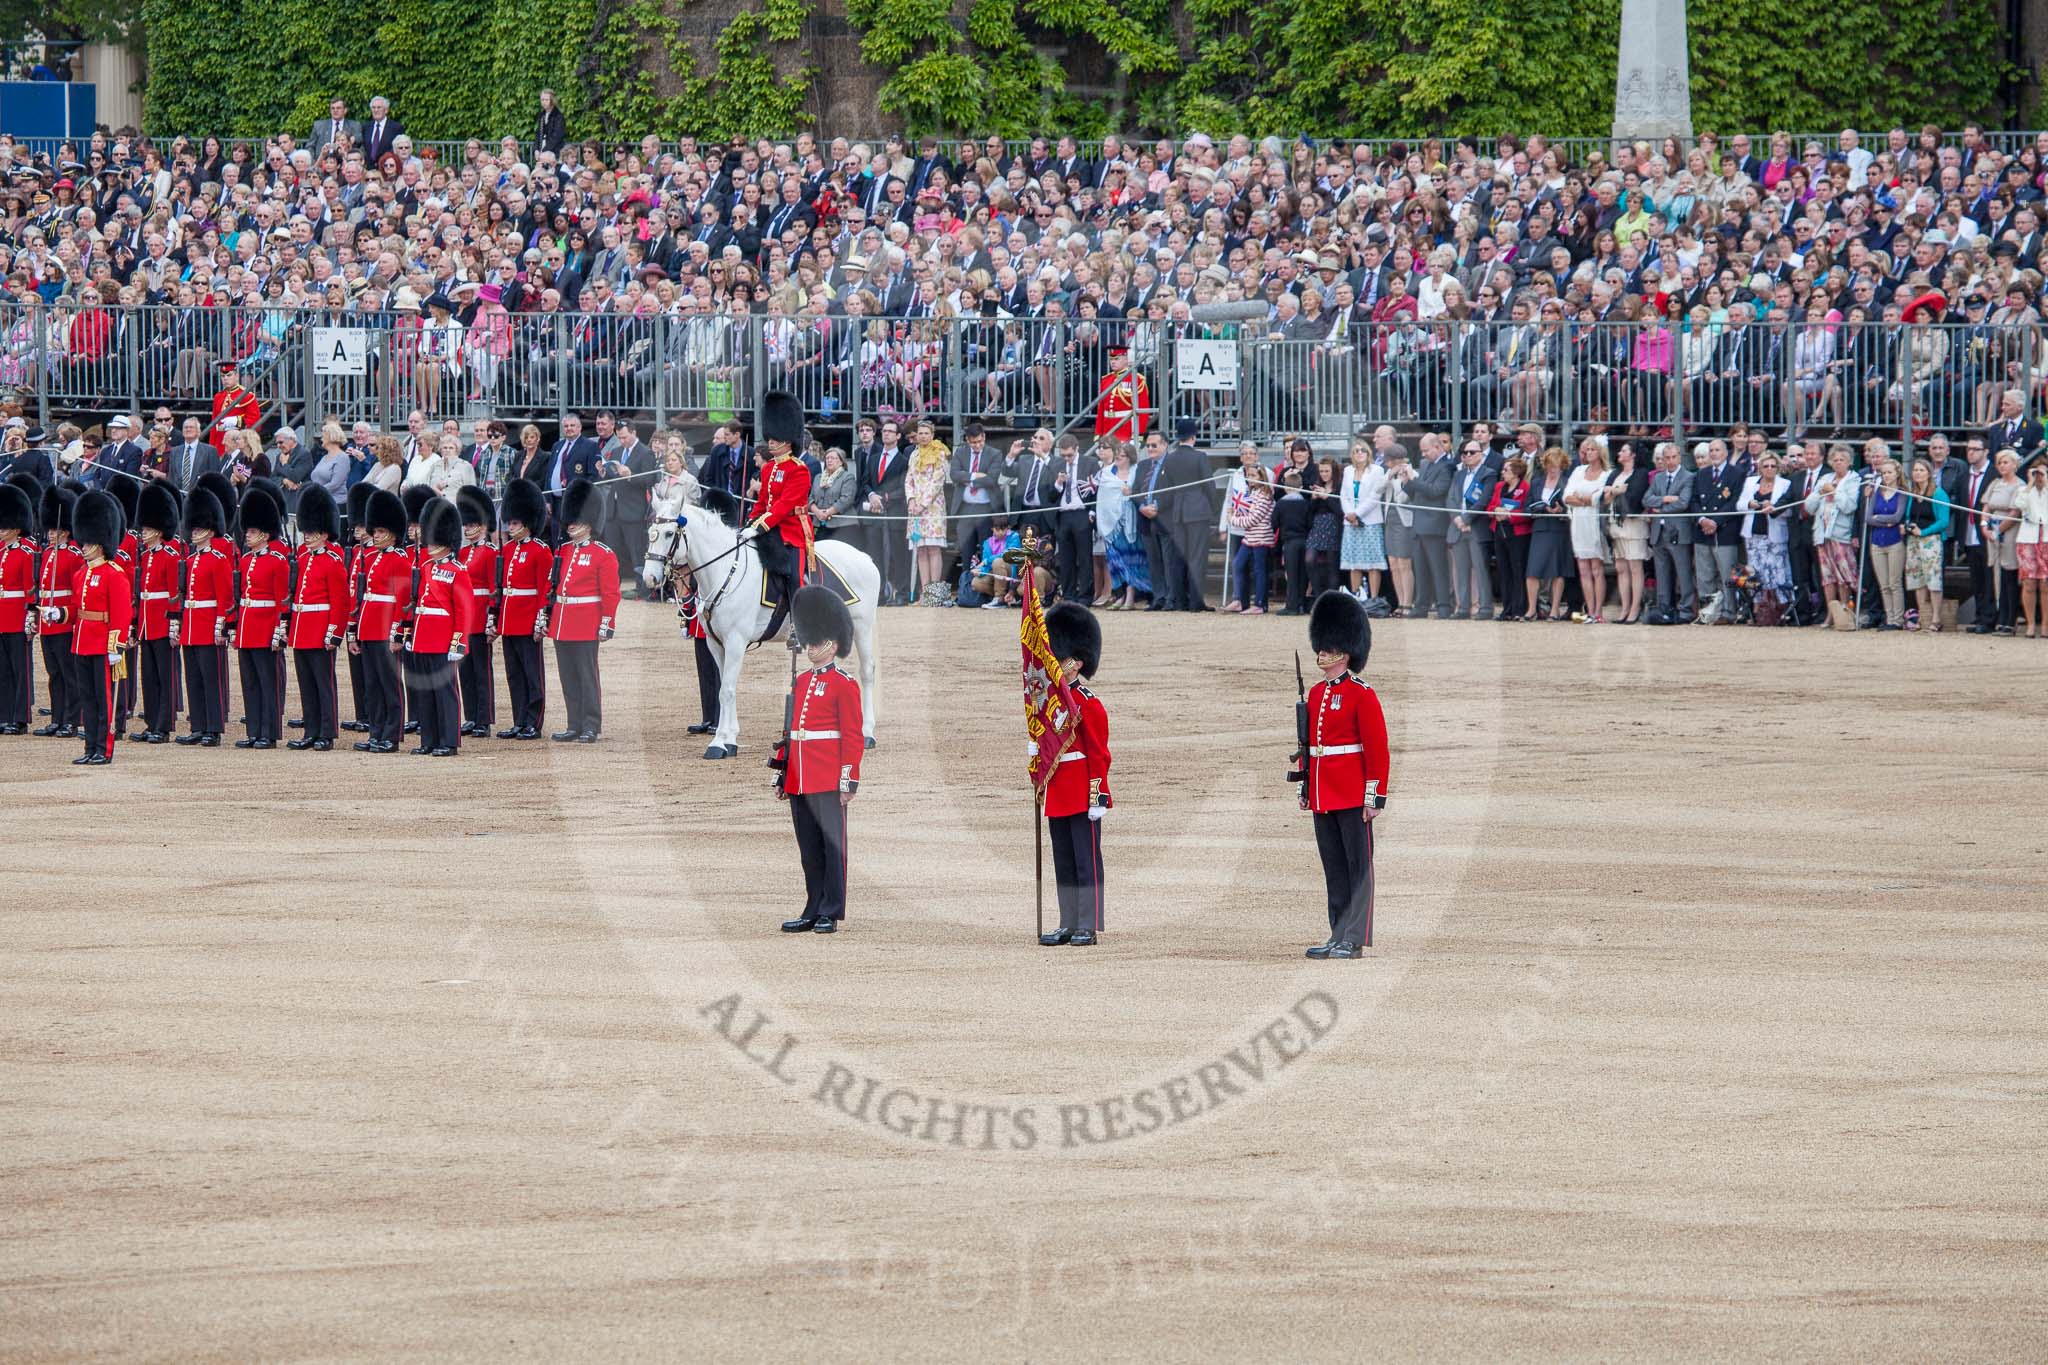 Trooping the Colour 2012: Protecting the Colour - the Colour Sergeant with the two Sentries. Behind them the Adjutant of the Parade, and No. 6 Guard, F Company Scots Guards..
Horse Guards Parade, Westminster,
London SW1,

United Kingdom,
on 16 June 2012 at 11:15, image #284